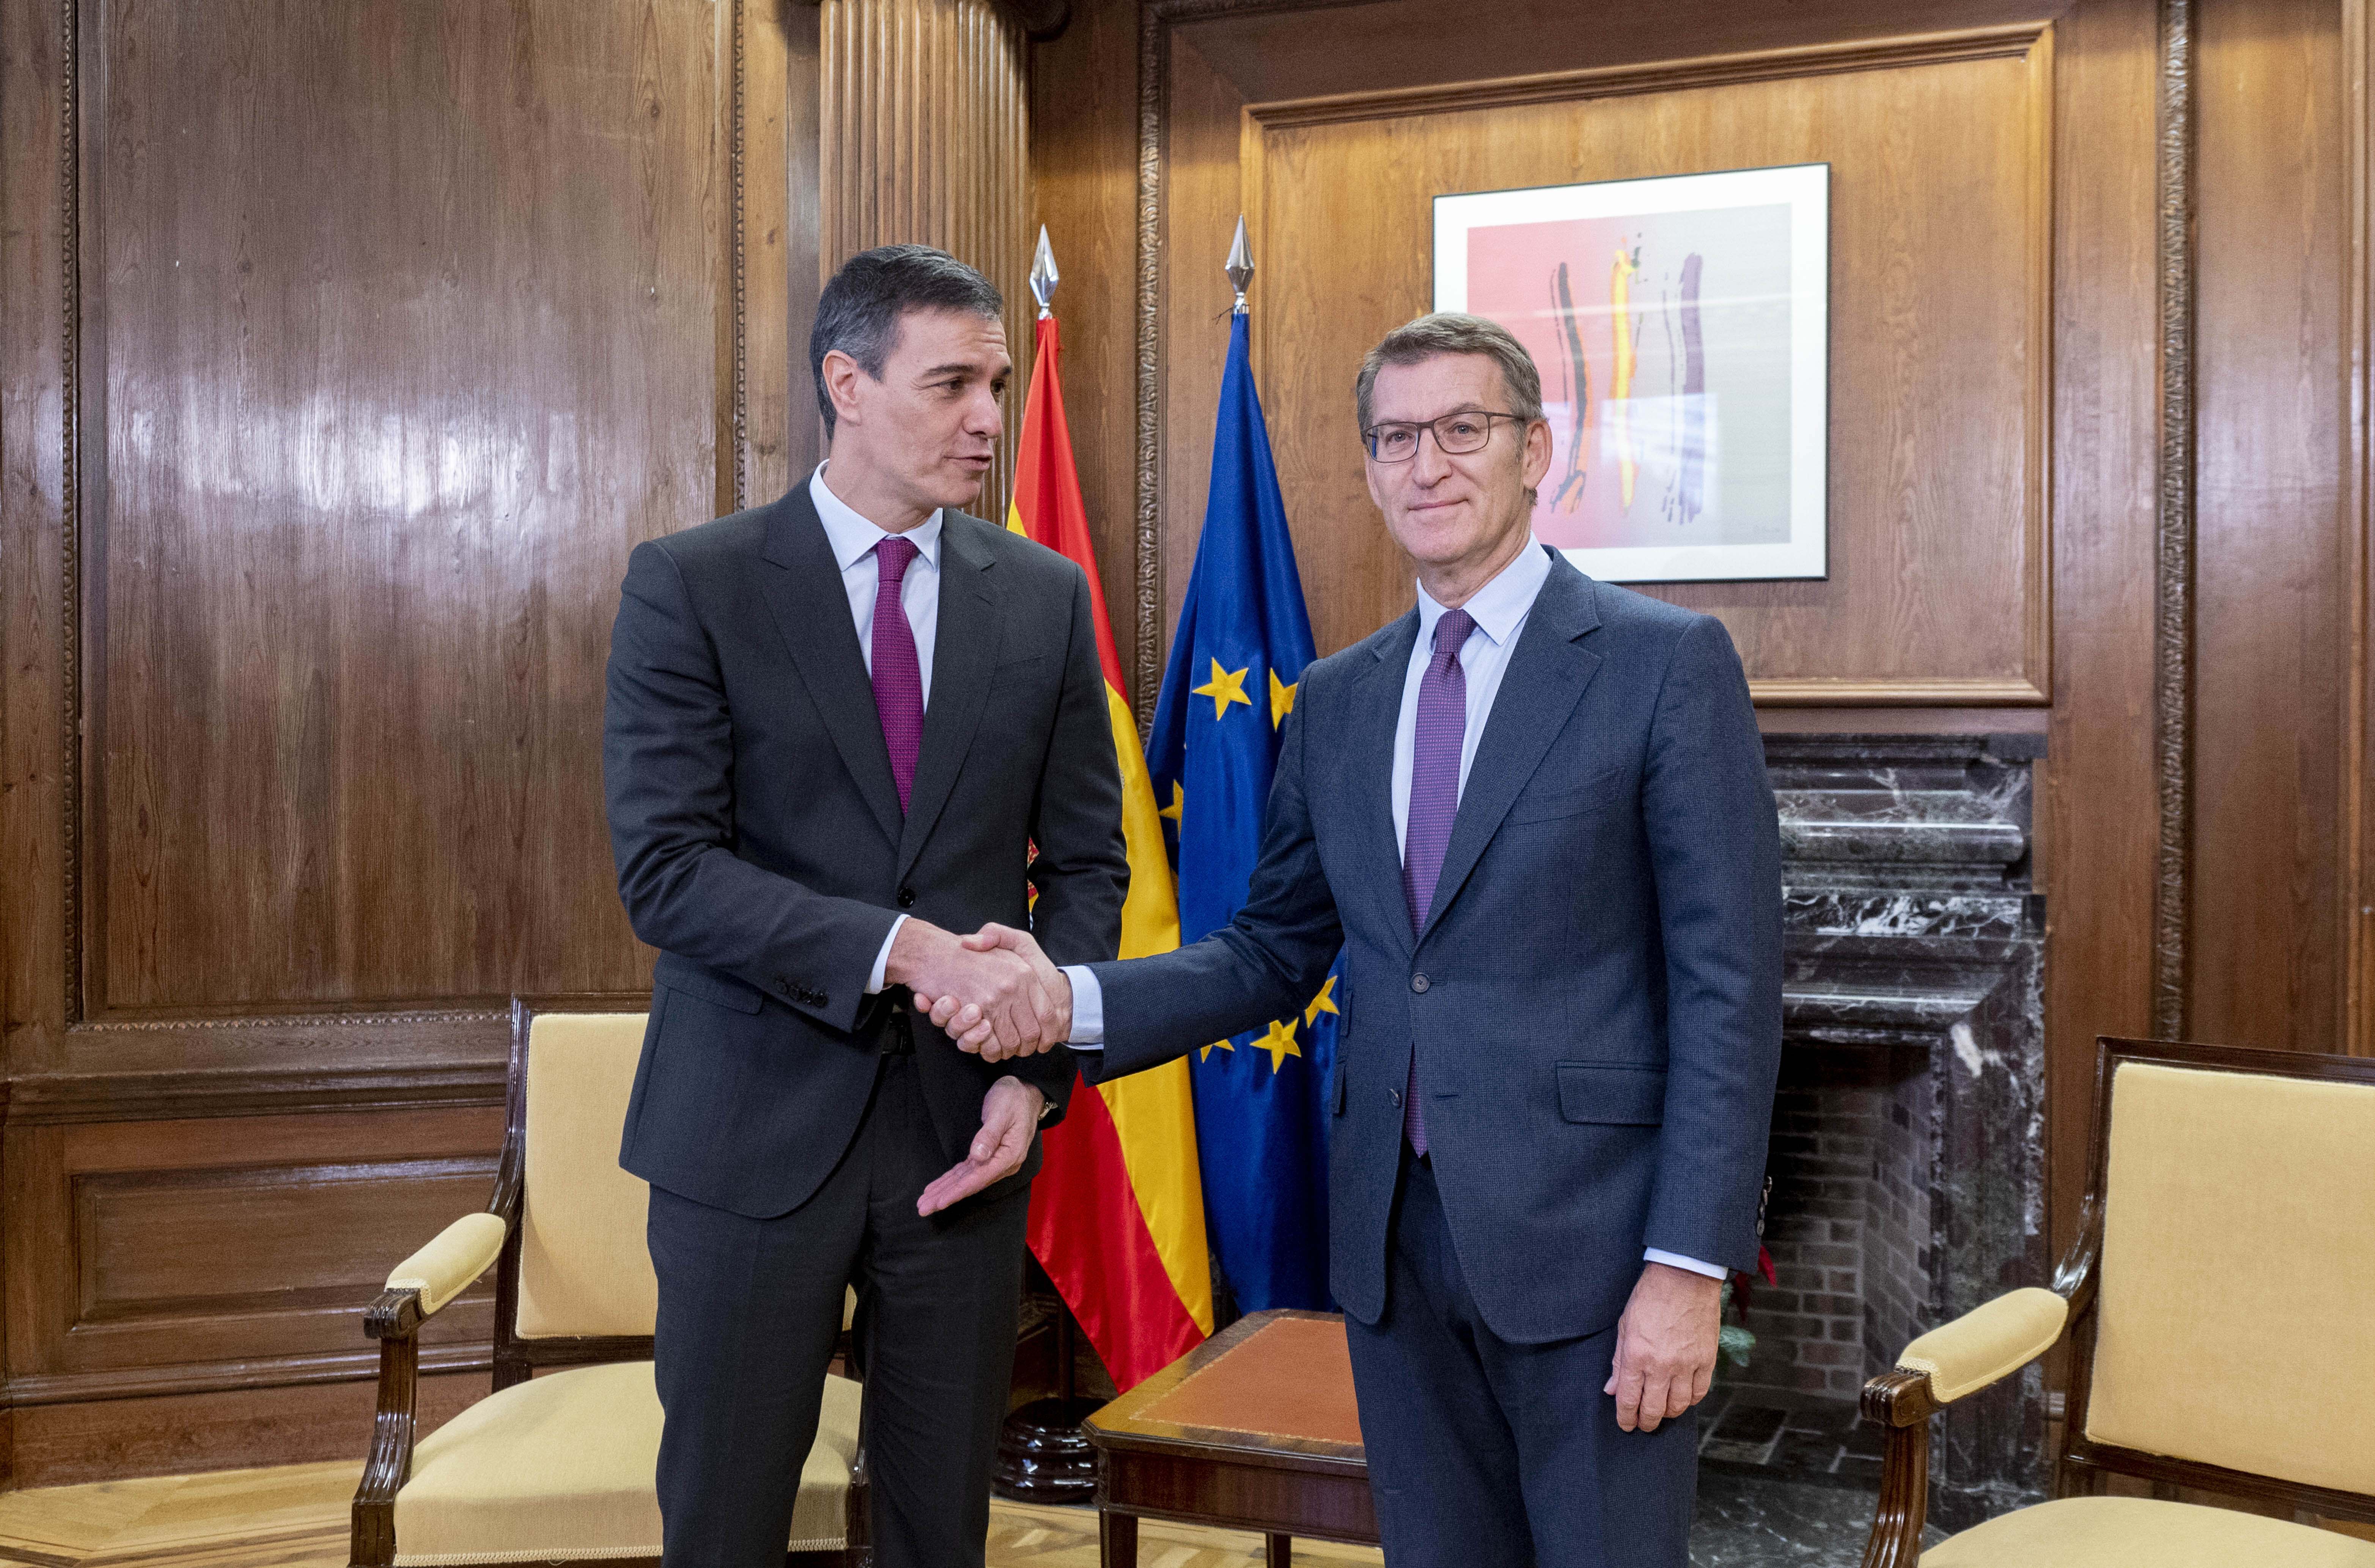 Feijóo's proposal to Sánchez: that the EU Commission mediates in Spain's judicial renewal